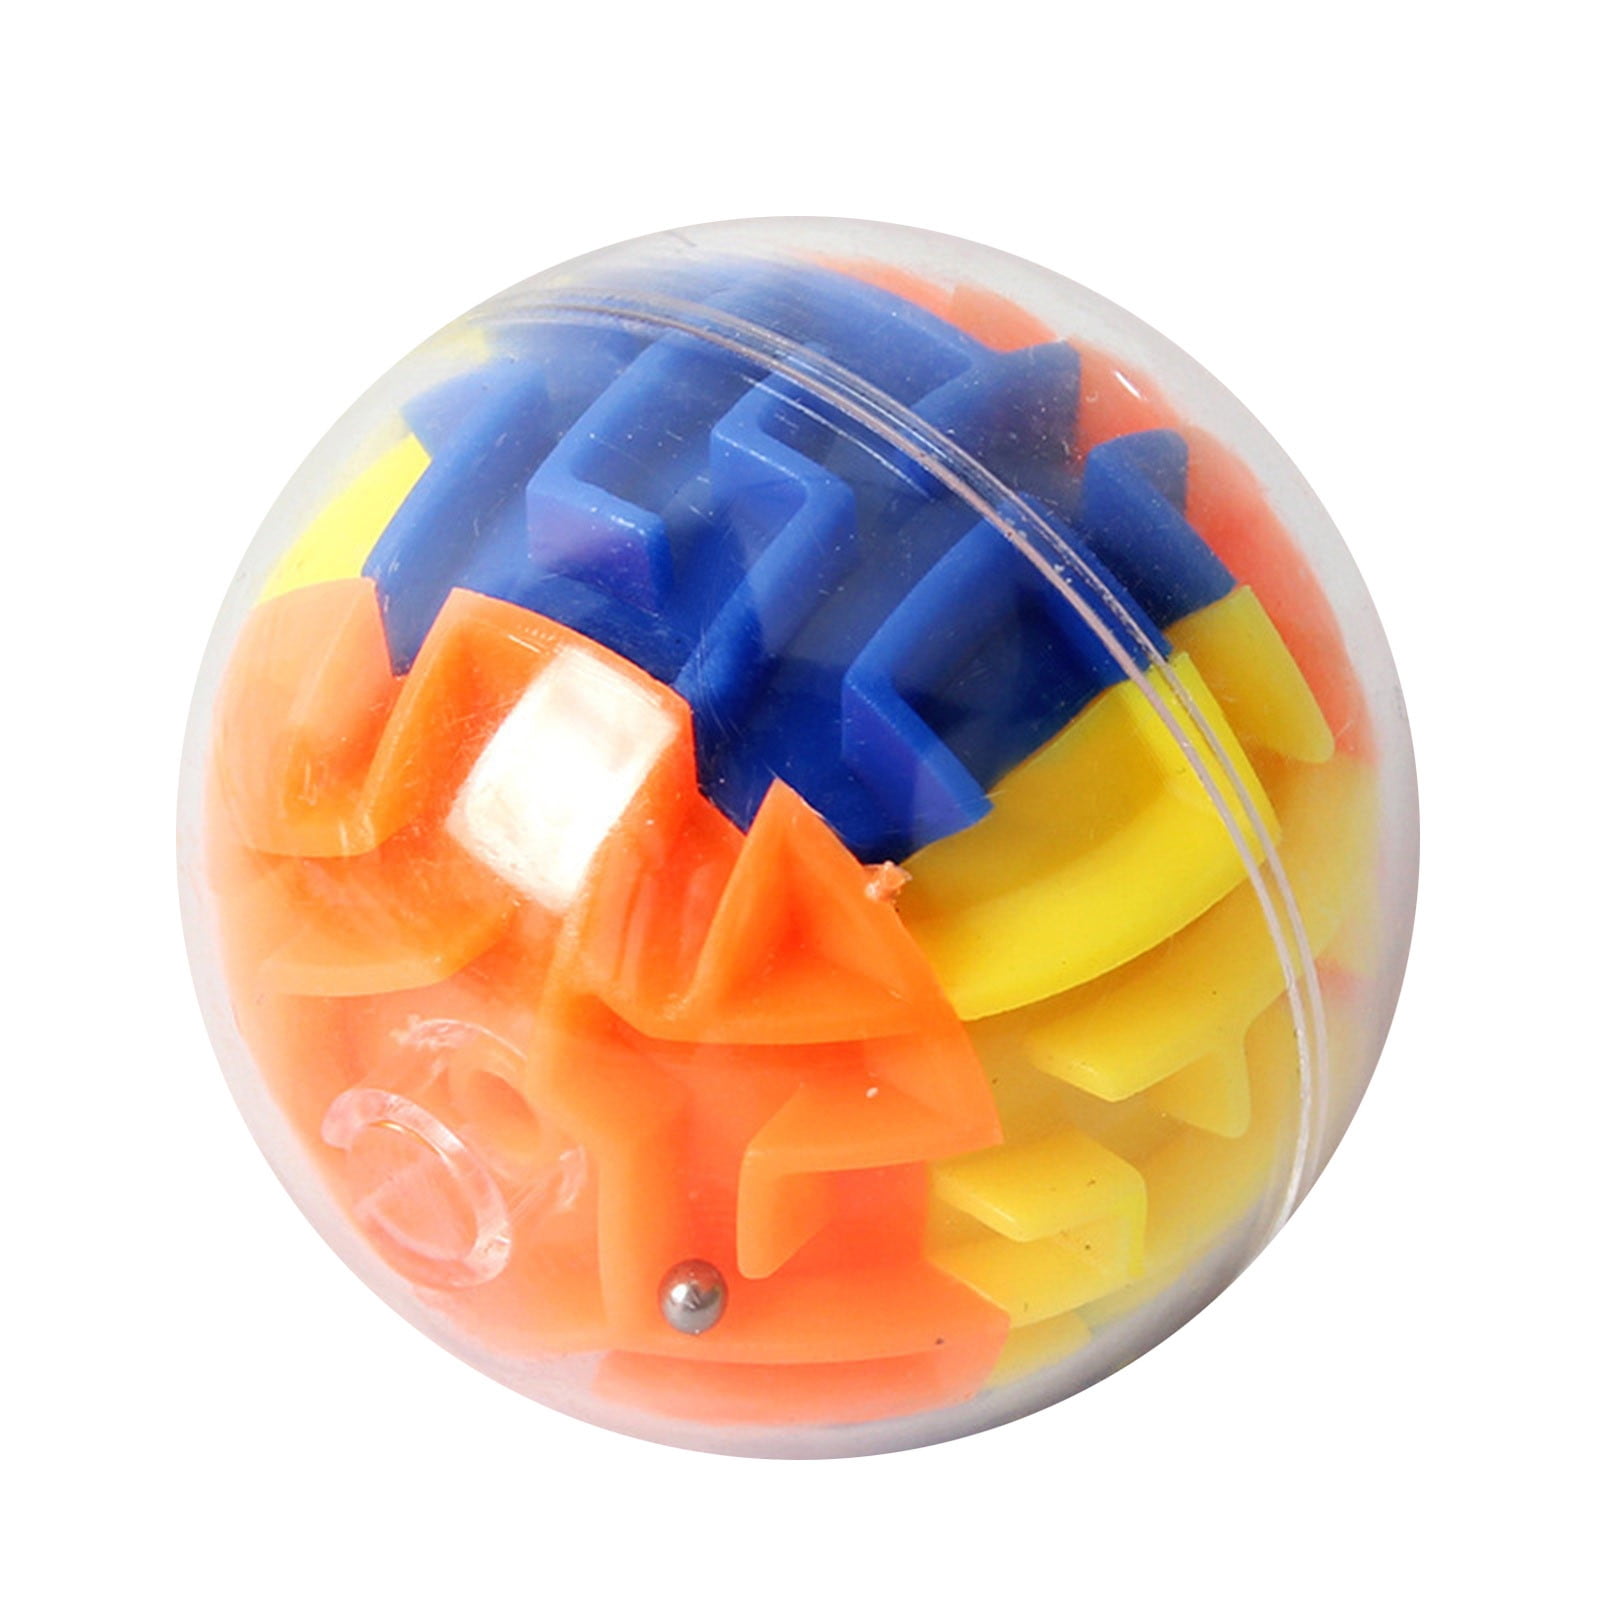 H... 3D Puzzle Toy Gravity Maze Ball Brain Teasers Games Gifts for Kids Adults 